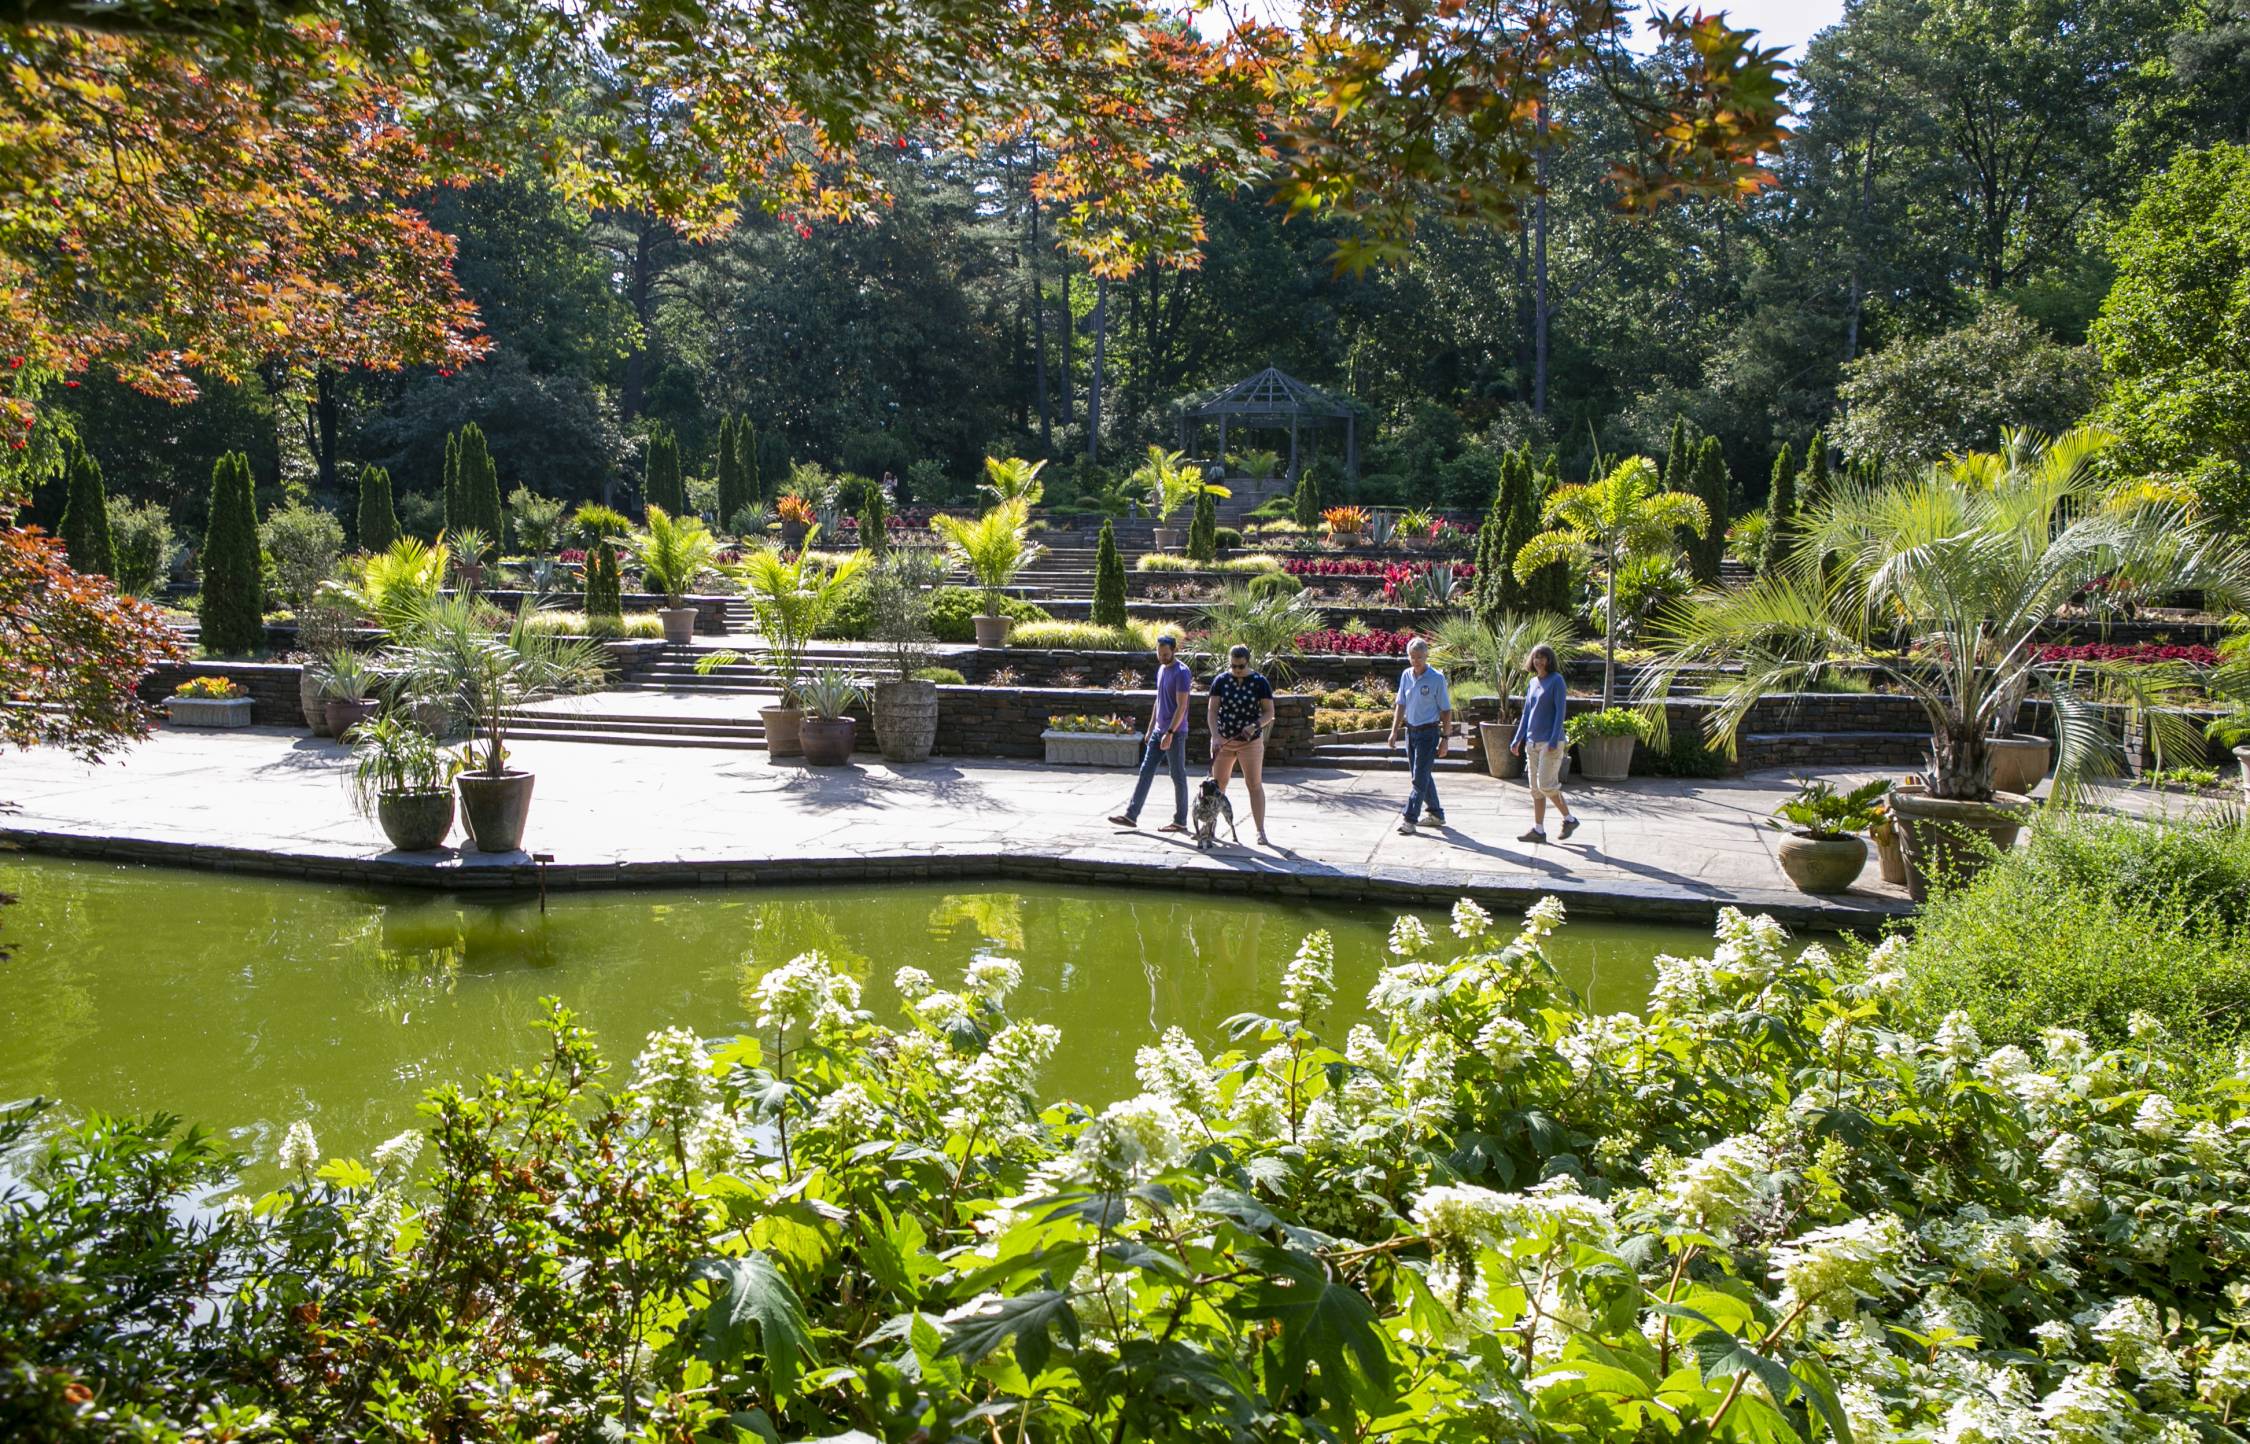 Visitors enjoy a morning walk through the Sarah P. Duke Gardens Terraces on the first day of the reopening to the community.